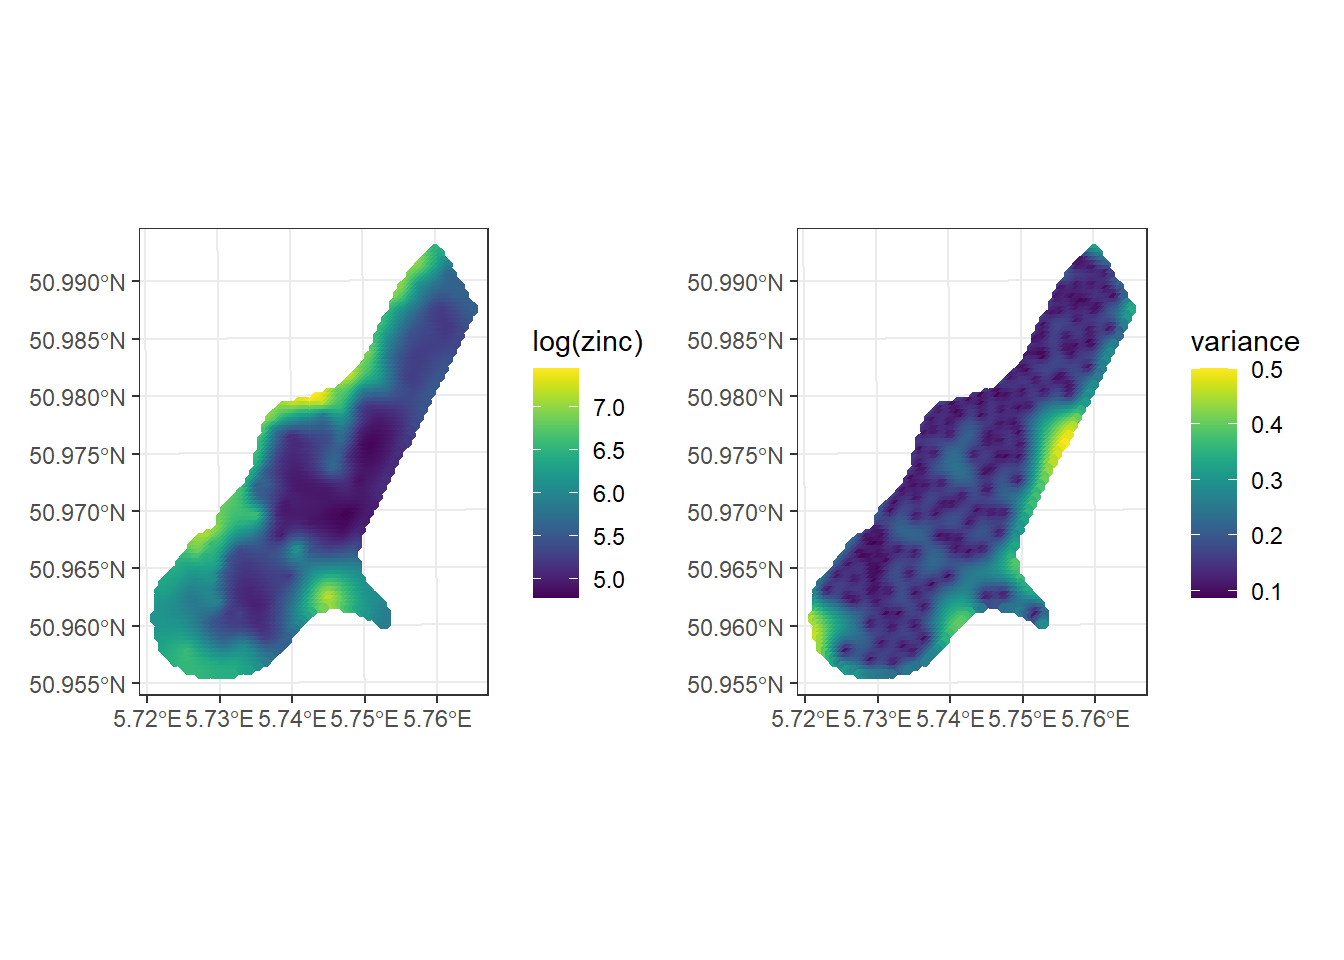 Predictions (left) and variance (right) obtained with Kriging.